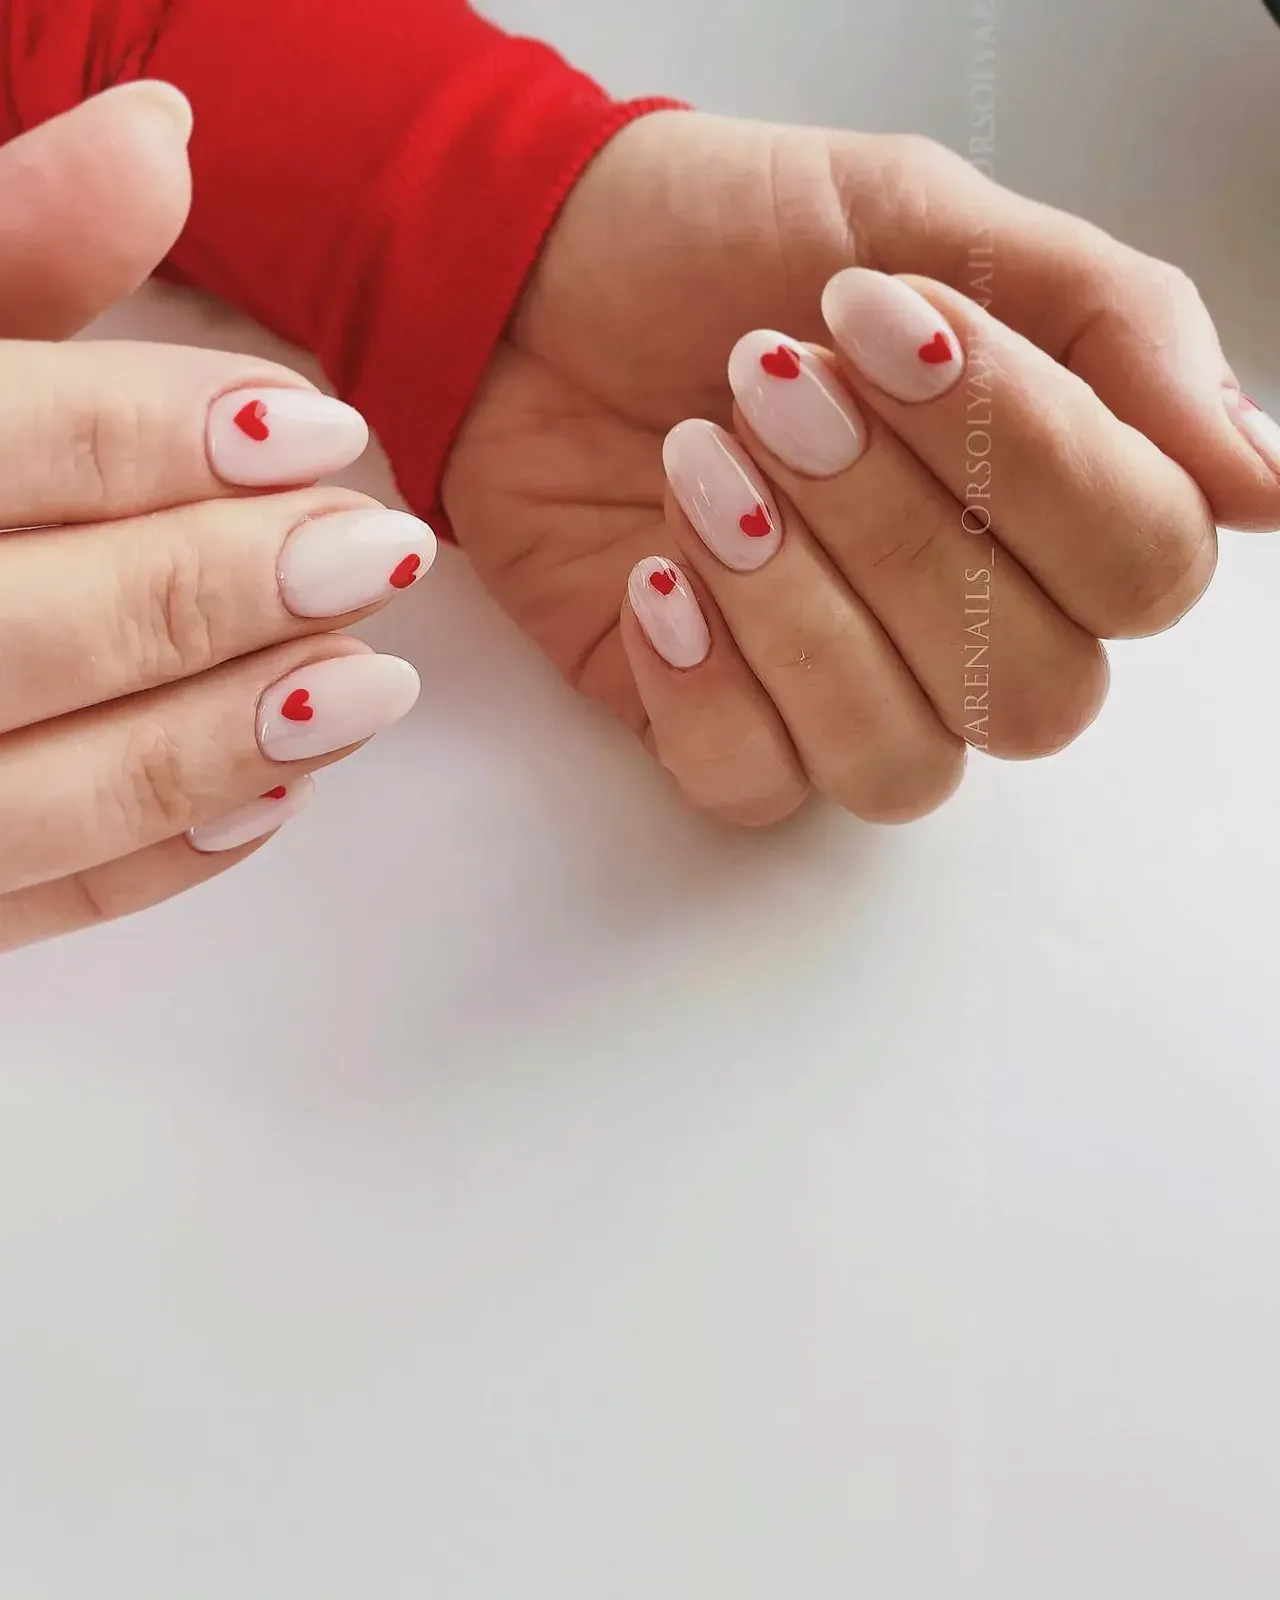 Intricately painted fingernails featuring a heart design on one nail